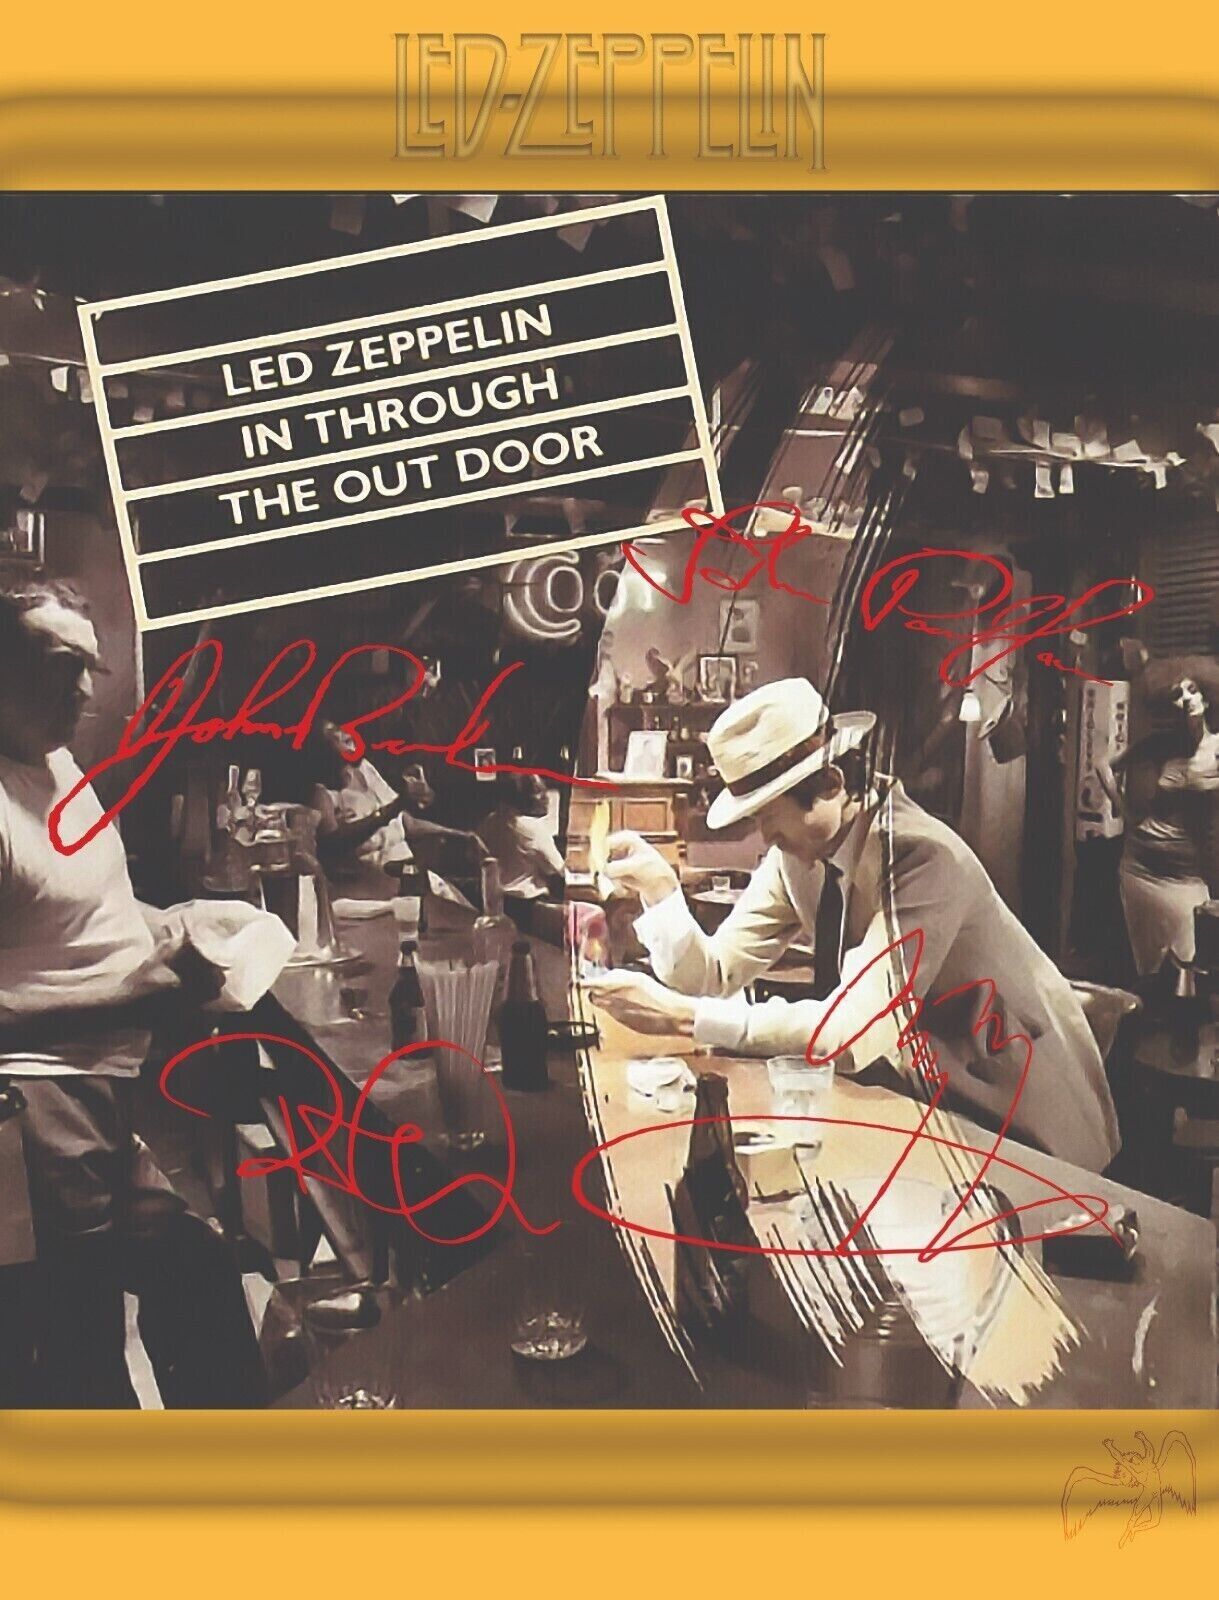 LED ZEPPELIN 8.5X11 ALBUM IN THROUGH THE OUT DOOR AUTOGRAPH SIGNED PHOTO REPRINT